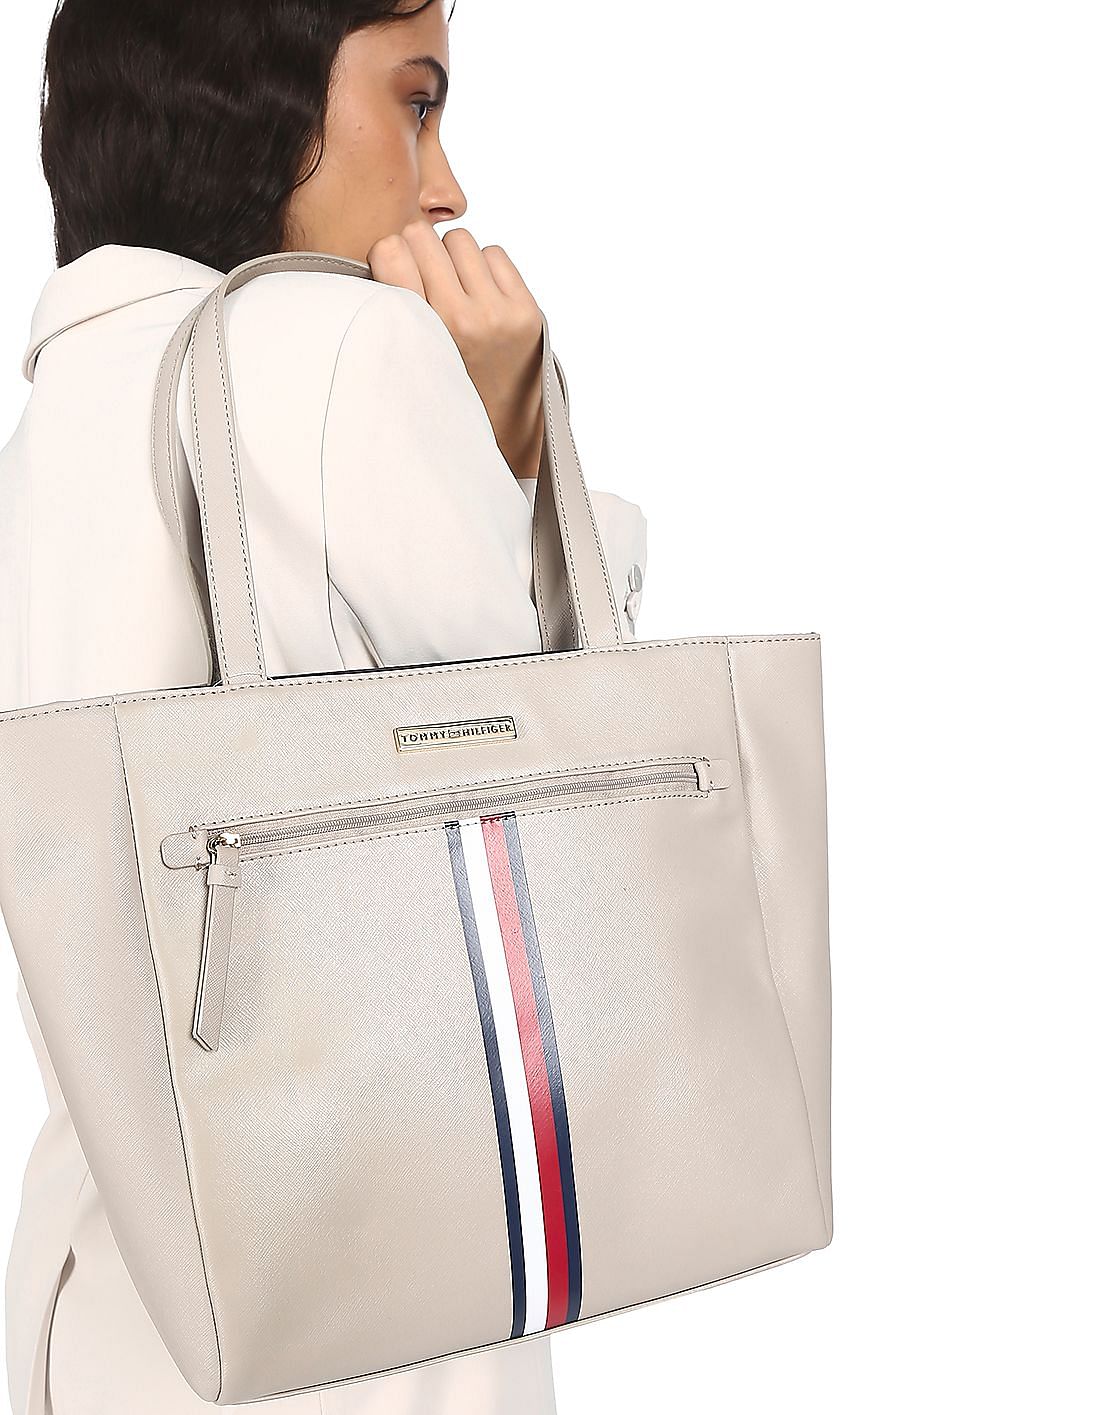 Buy Tommy Hilfiger Women Pink Top Handle Striped Tote Bag - NNNOW.com